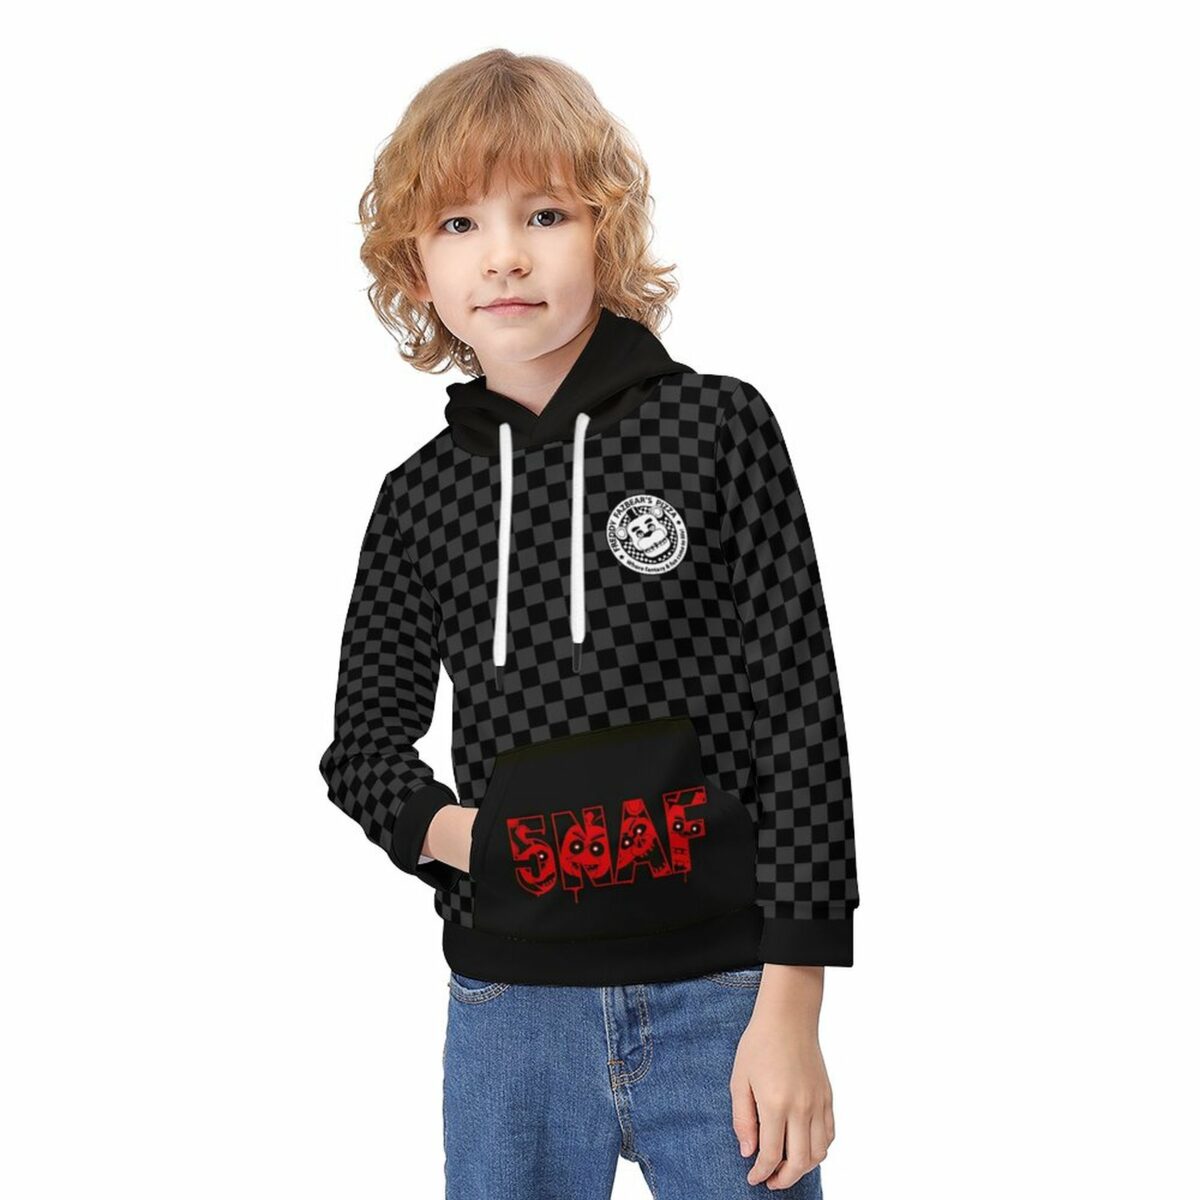 Five Nights At Freddy’s 230gsm Hoodie for Kids (All-Over Printing) Cool Kiddo 12